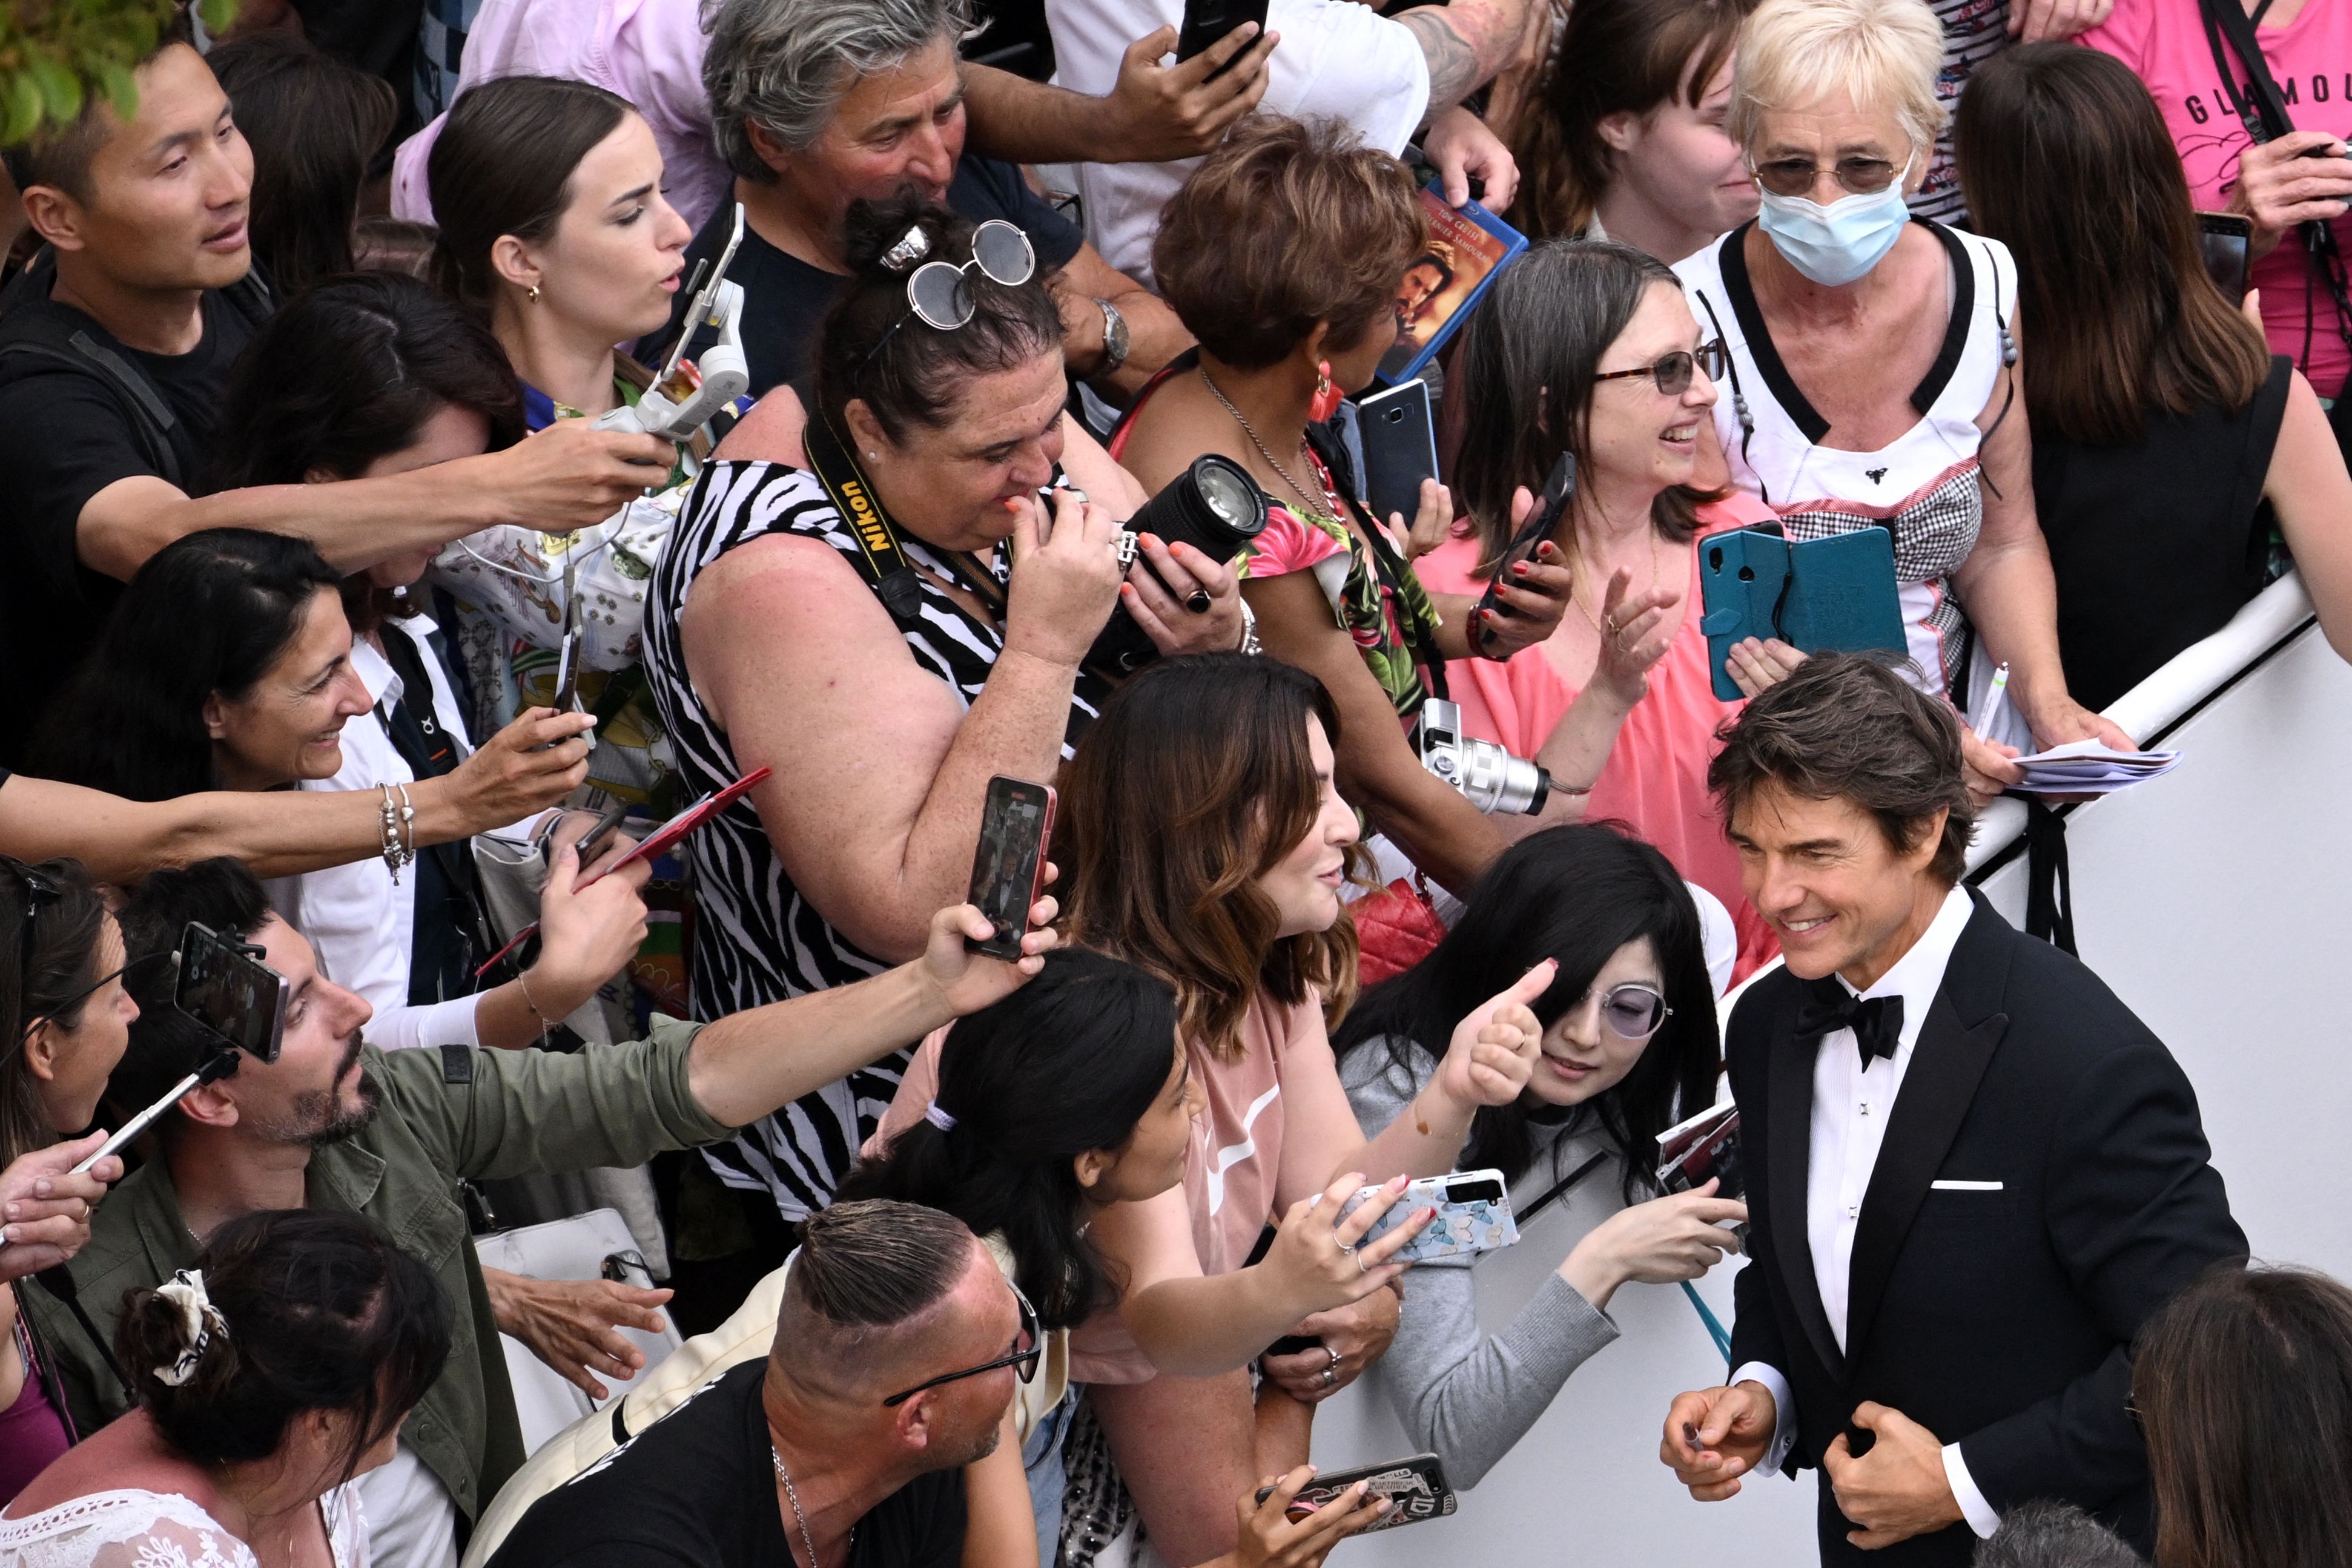 Tom Cruise poses for selfies as he arrives for the screening of the film "Top Gun : Maverick" during the 75th edition of the Cannes Film Festival in Cannes, southern France, on May 18, 2022. (Photo by LOIC VENANCE / AFP)(AFP)